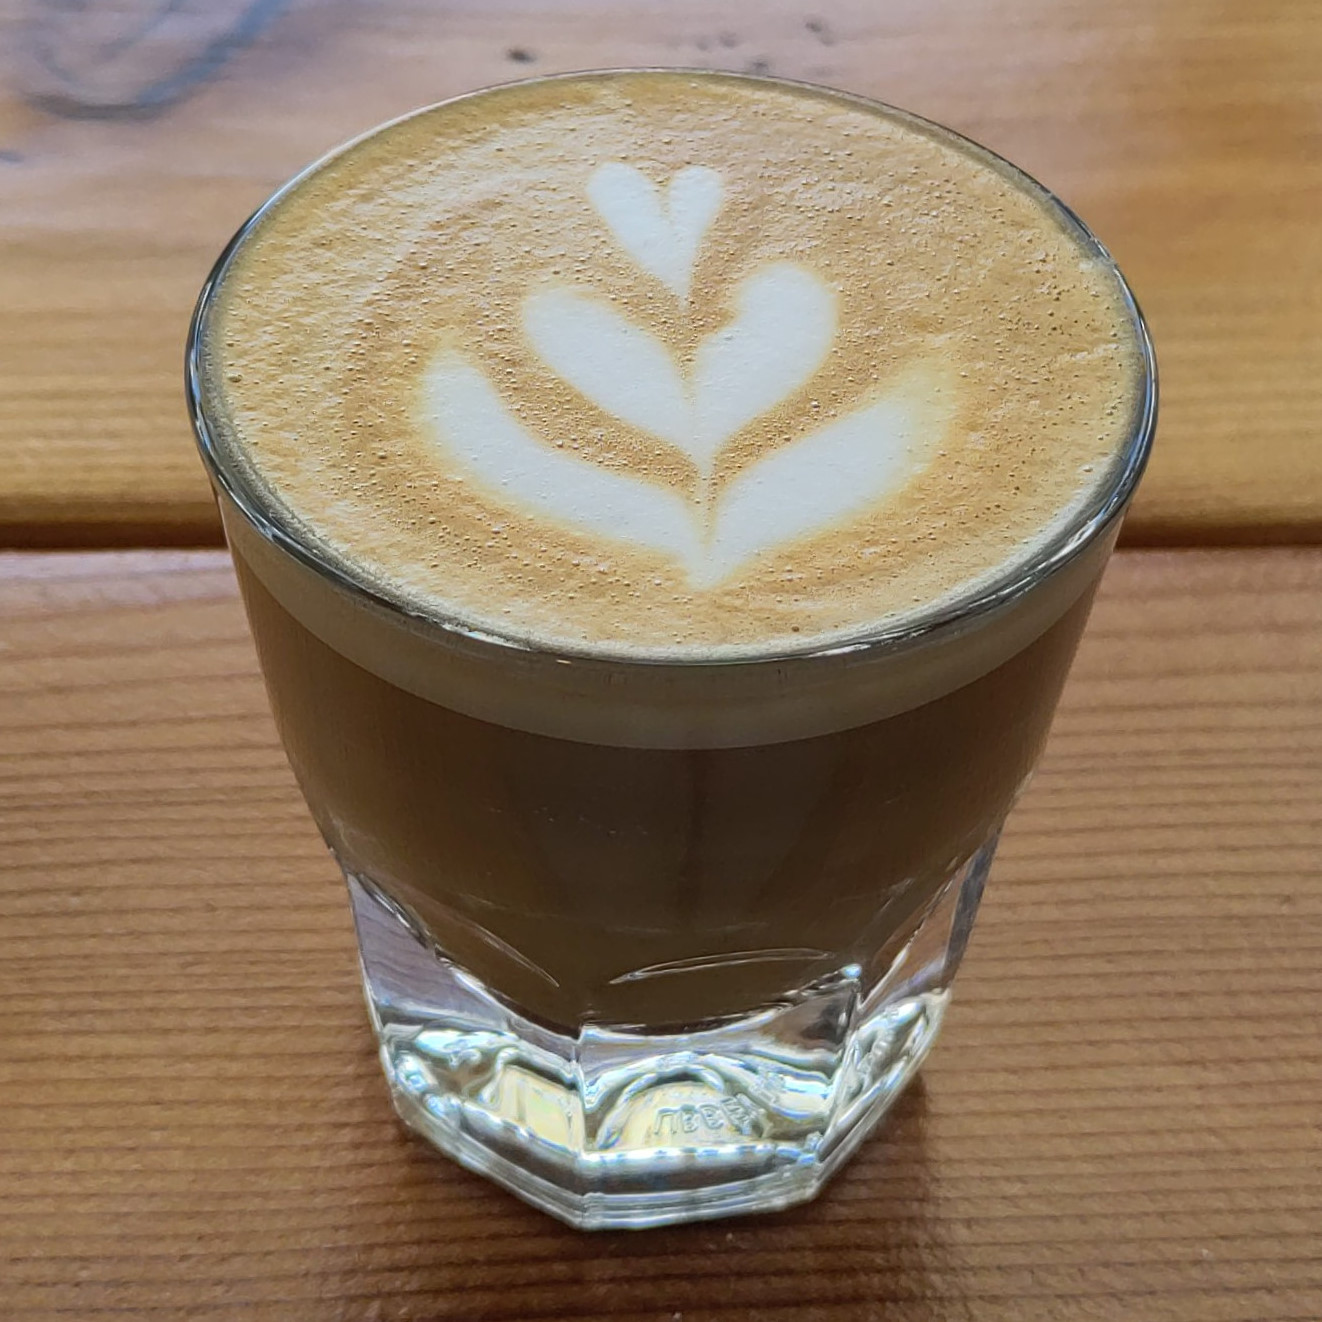 A lovely cortado served in a glass at Fleet Coffee in Austin.